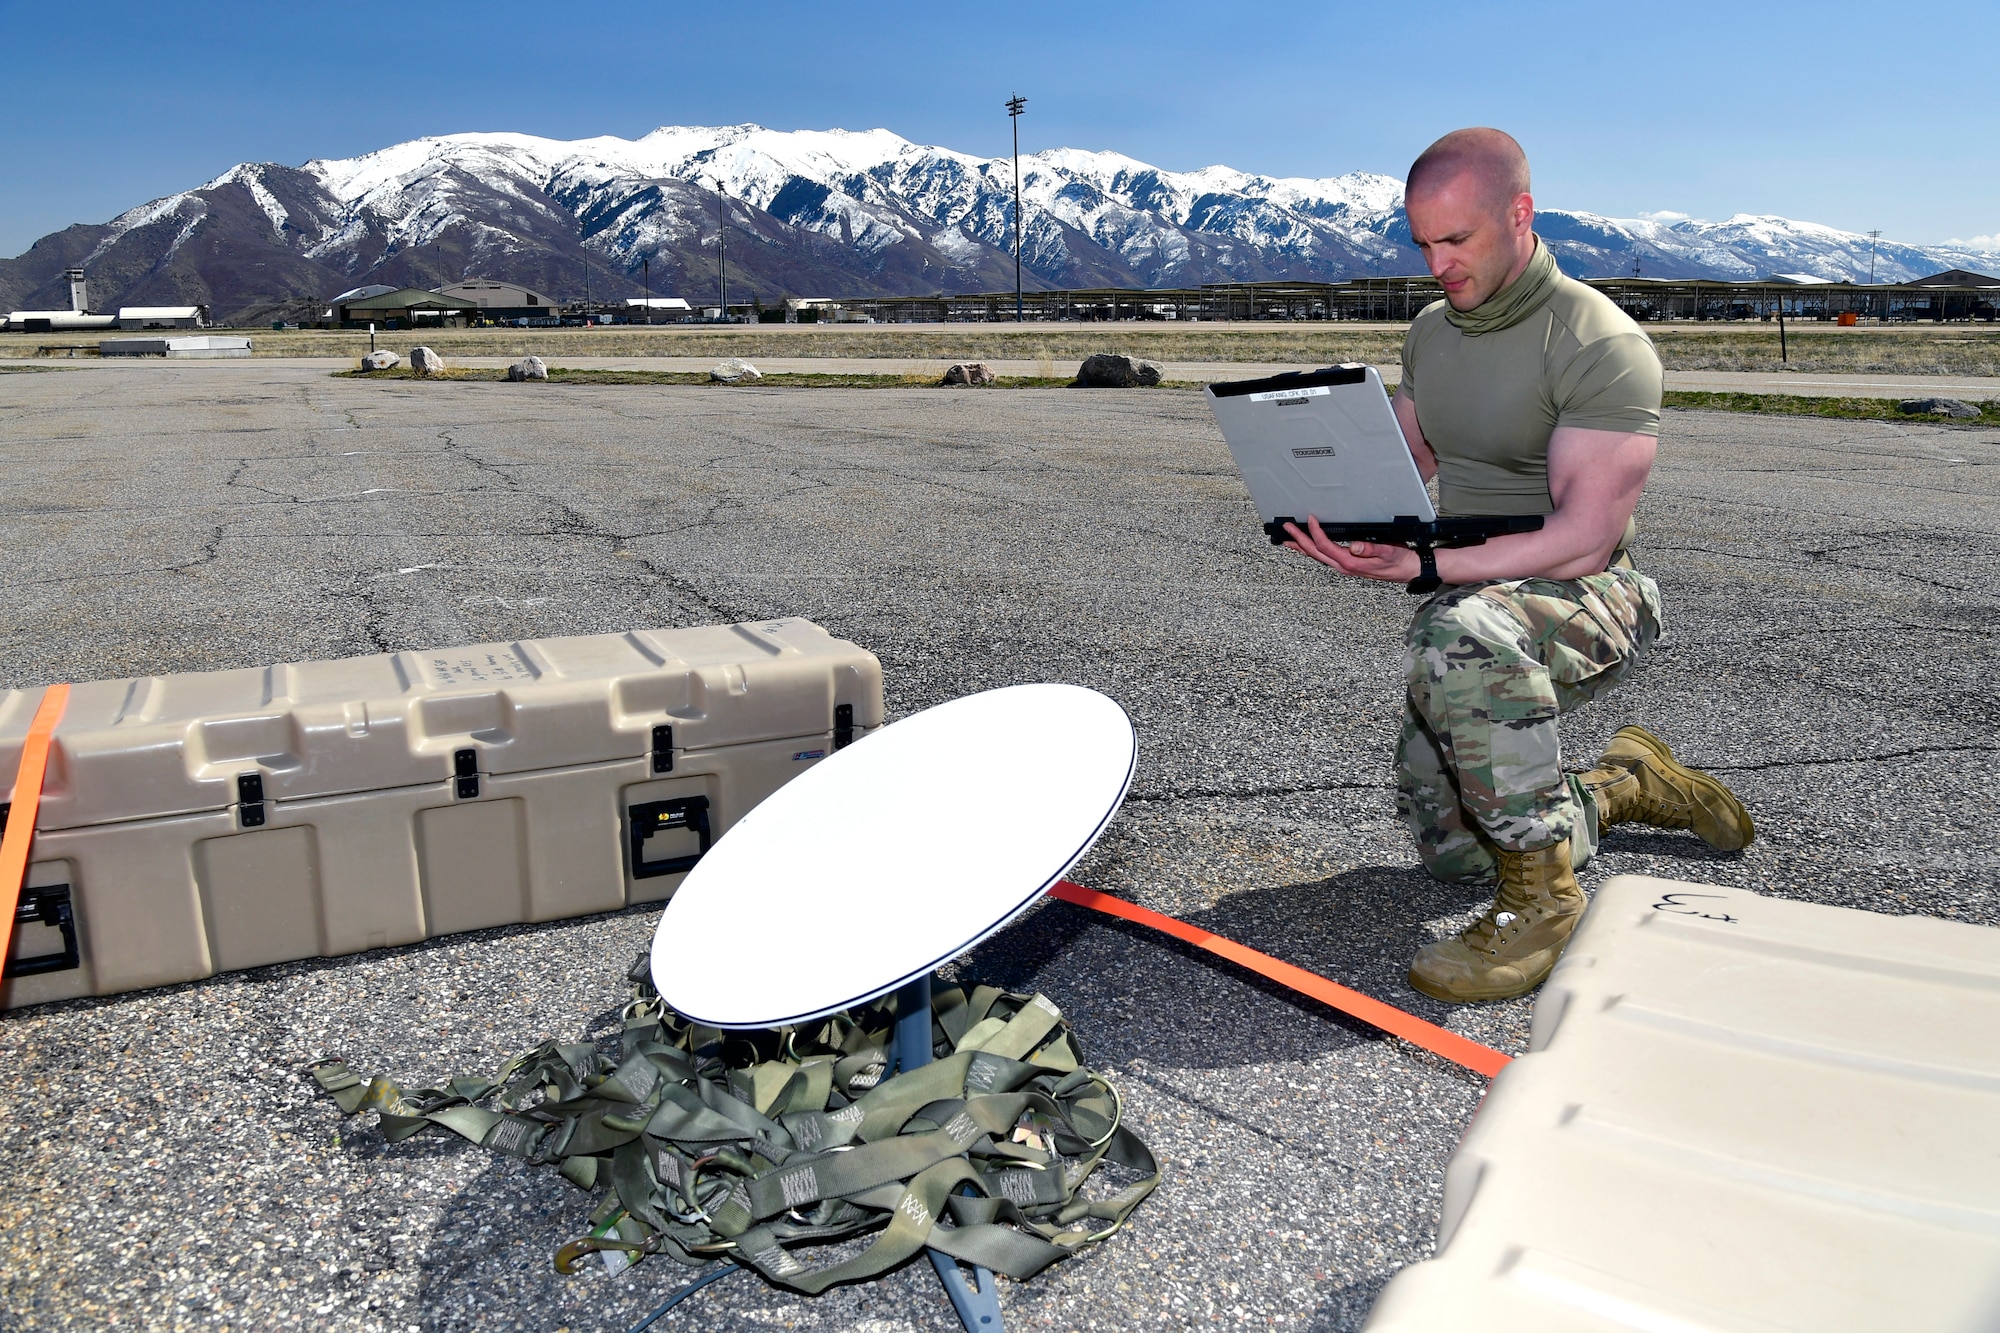 Master Sgt. Caleb Frisbie, 242nd Combat Communications Squadron, sets up and tests communication equipment